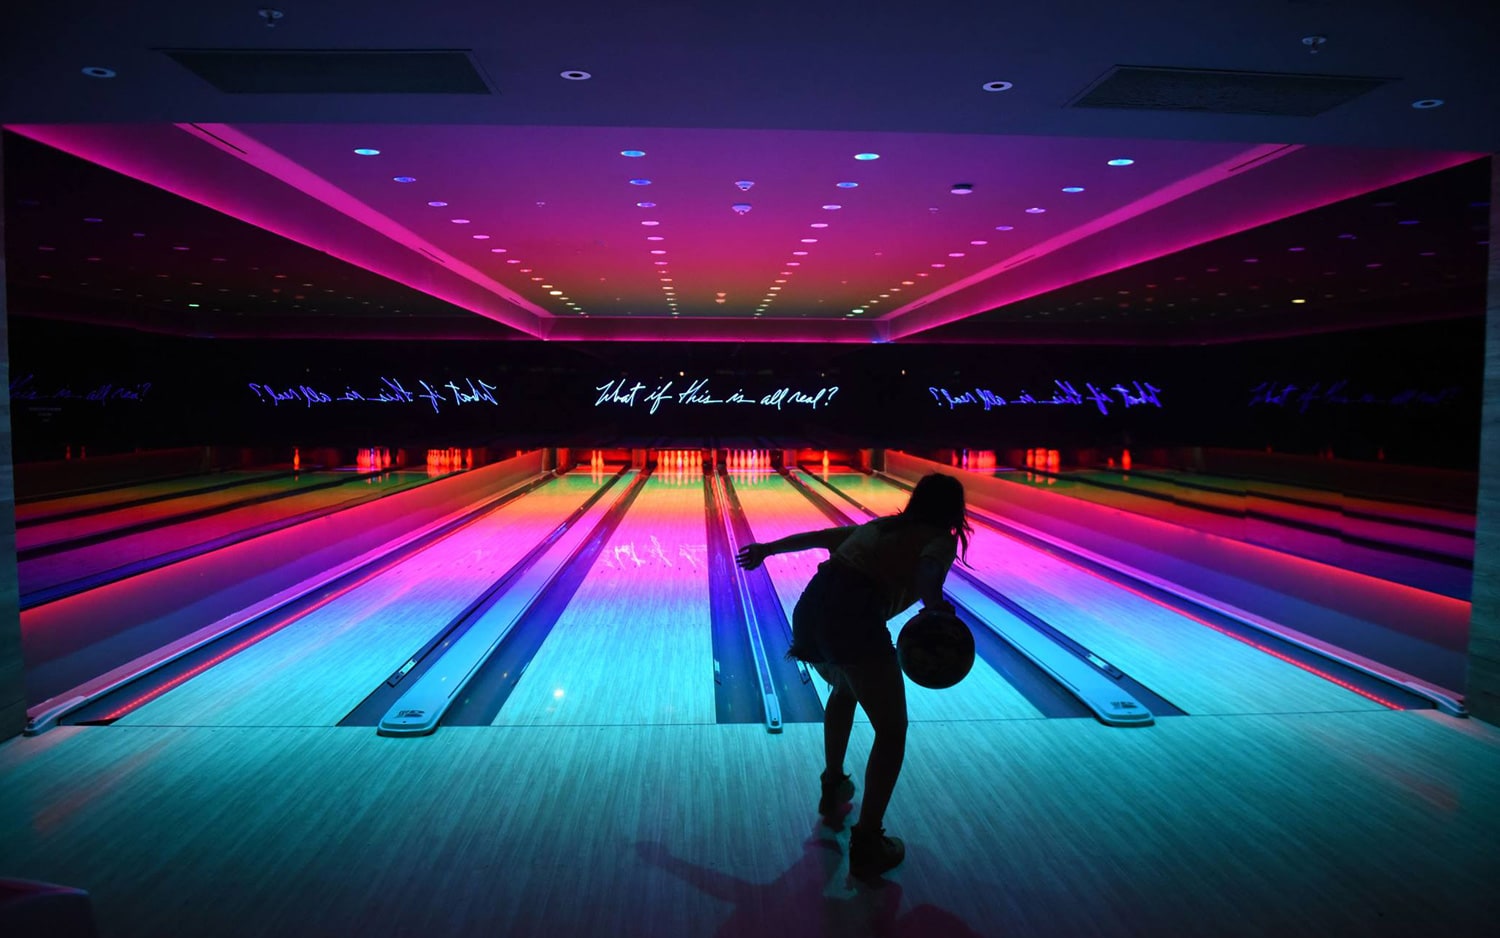 A woman bowling in an alley with vibrant neon lights and glowing lanes, with a text projection asking 